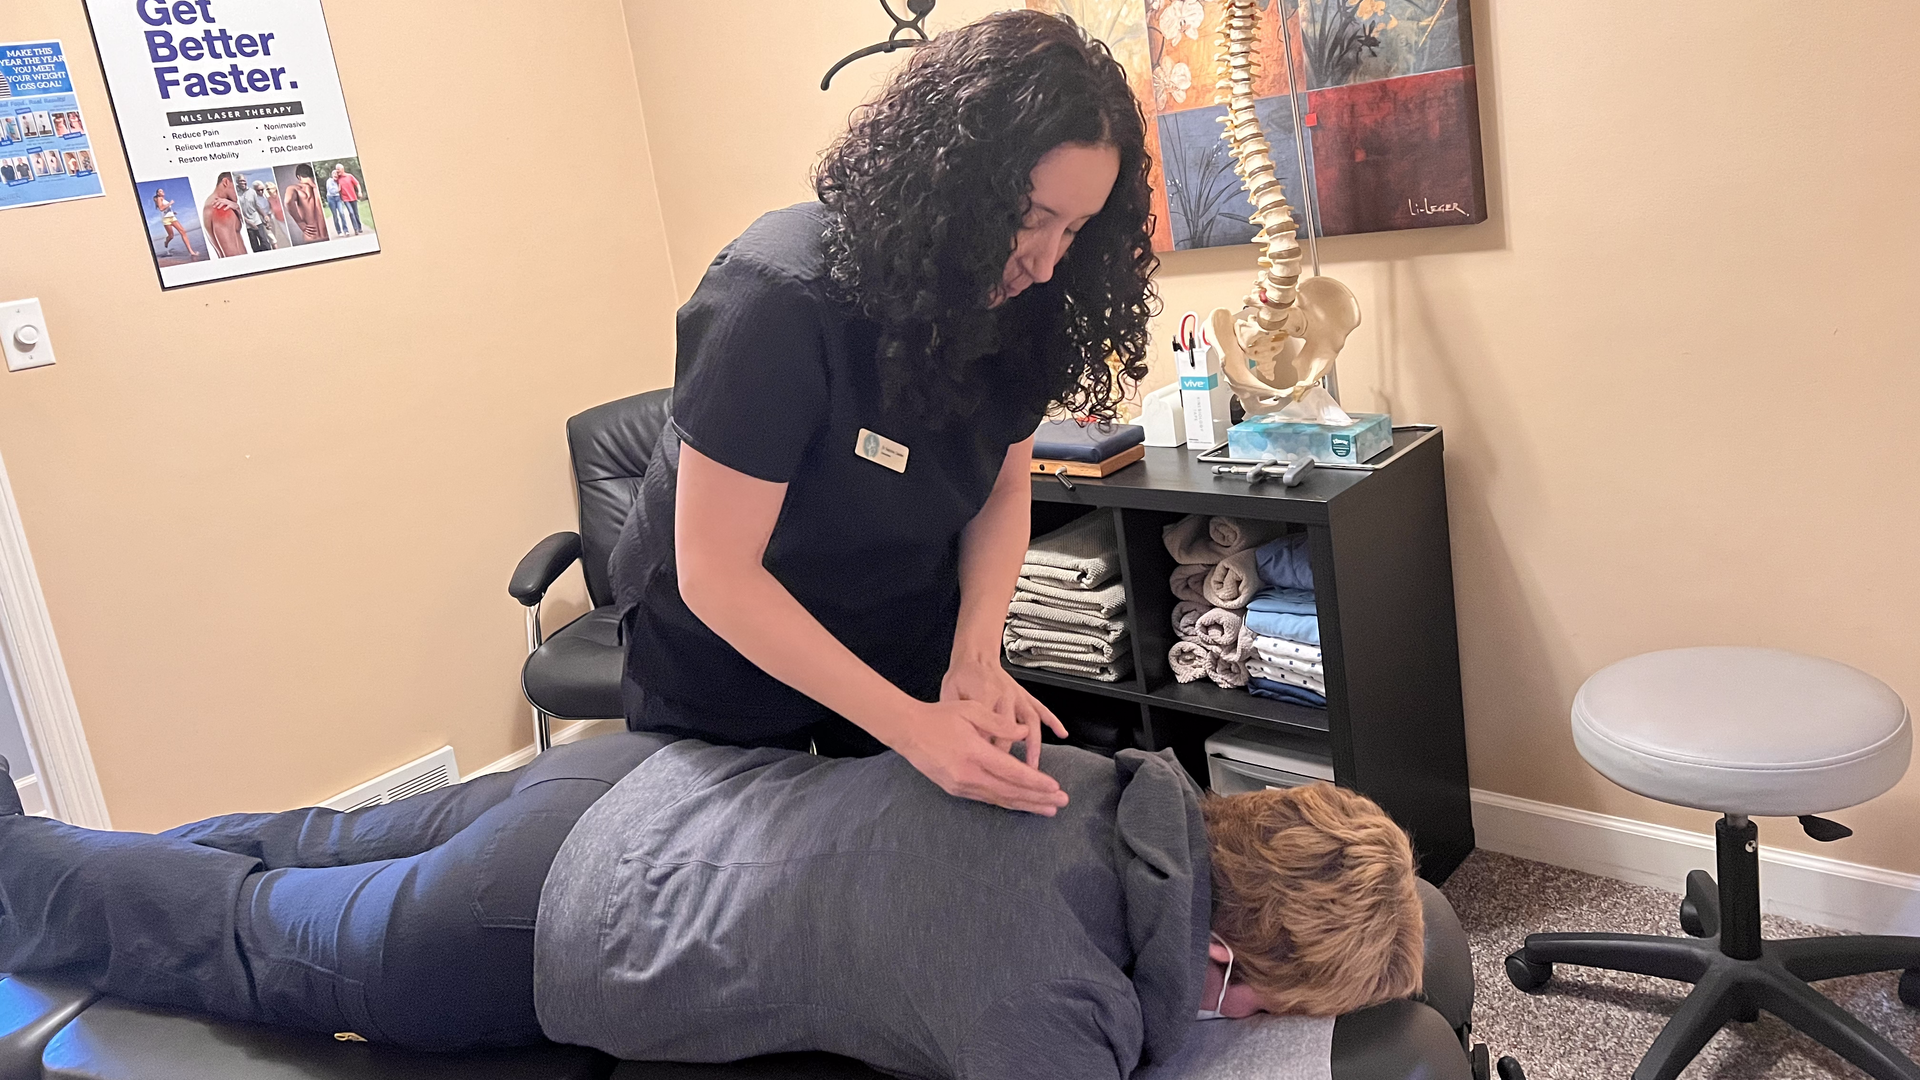 Chiropractic Adjustment of a shoulder and back by Dr. Sabrina